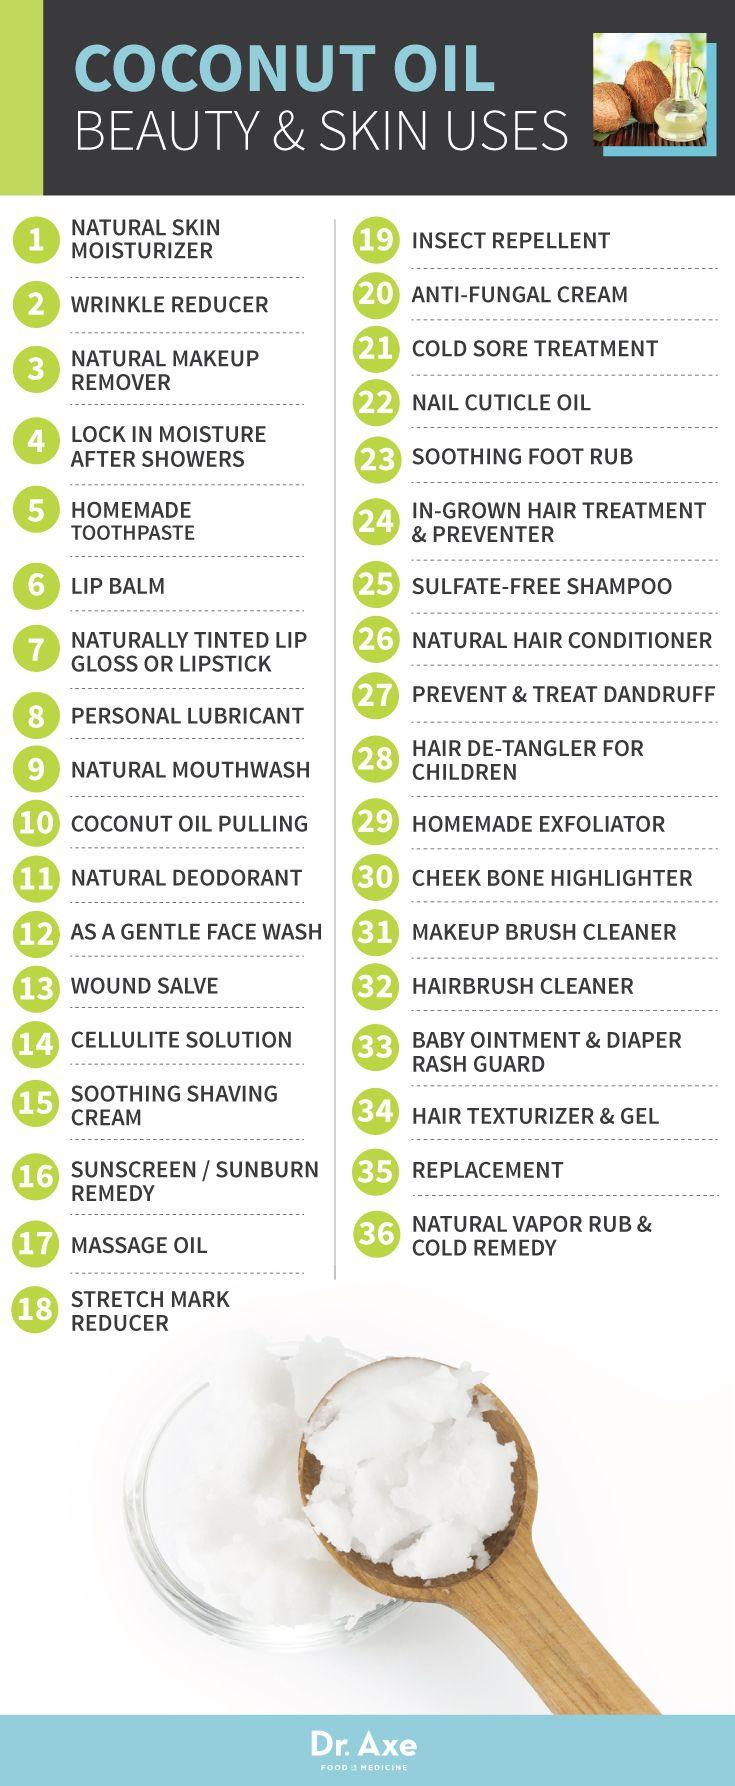 Wedding - 77 Coconut Oil Uses And Cures - DrAxe.com